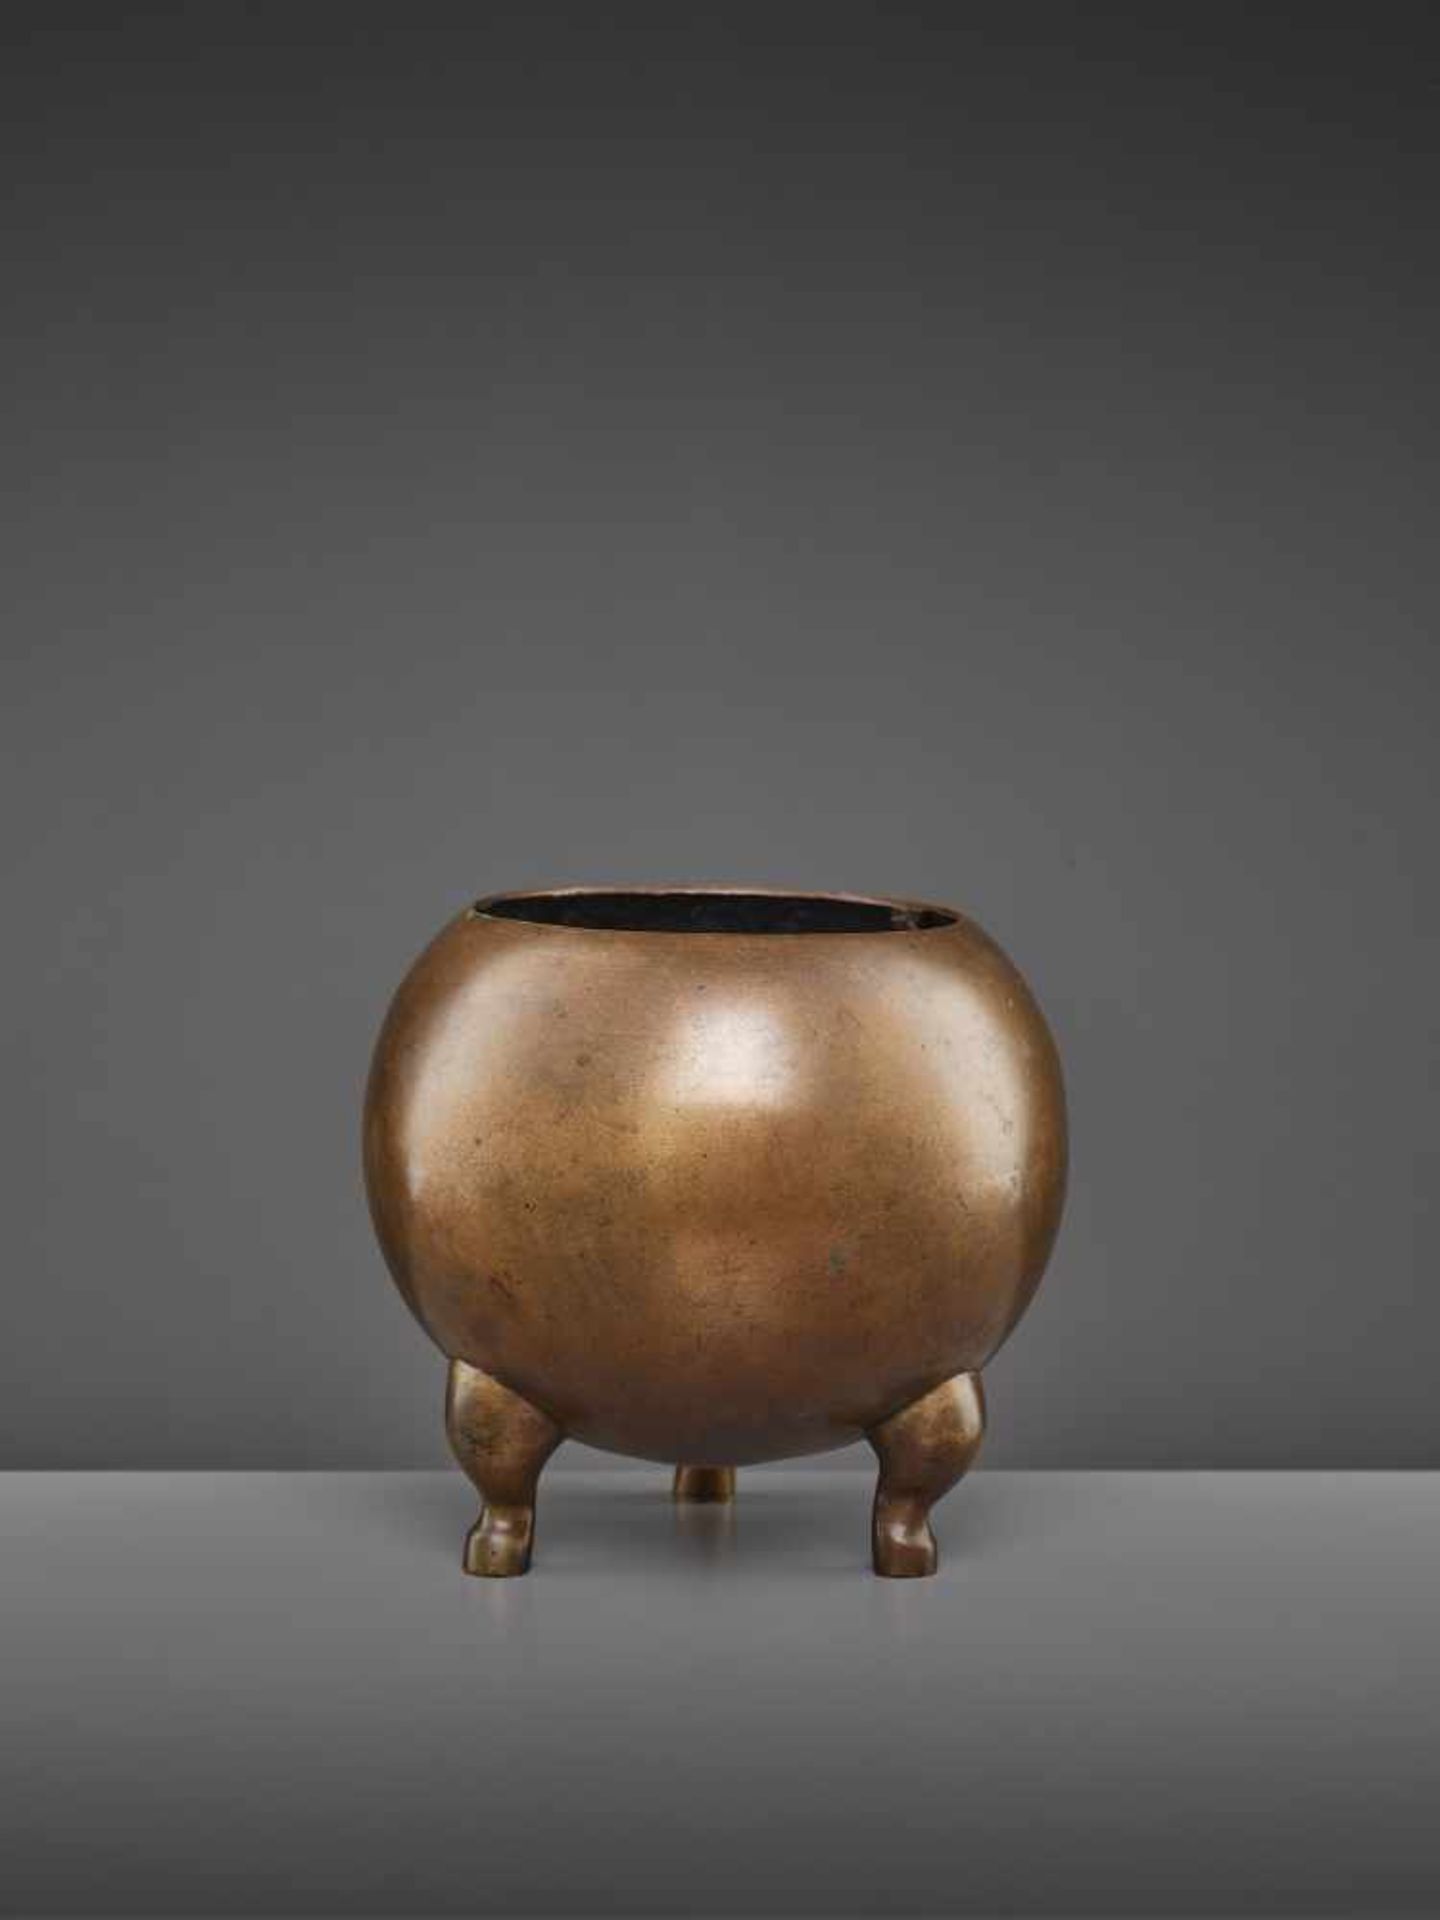 A RARE TRIPOD CENSER EARLY QINGChina, late 17th-earlier 18th century. The large vessel of simple yet - Image 9 of 9